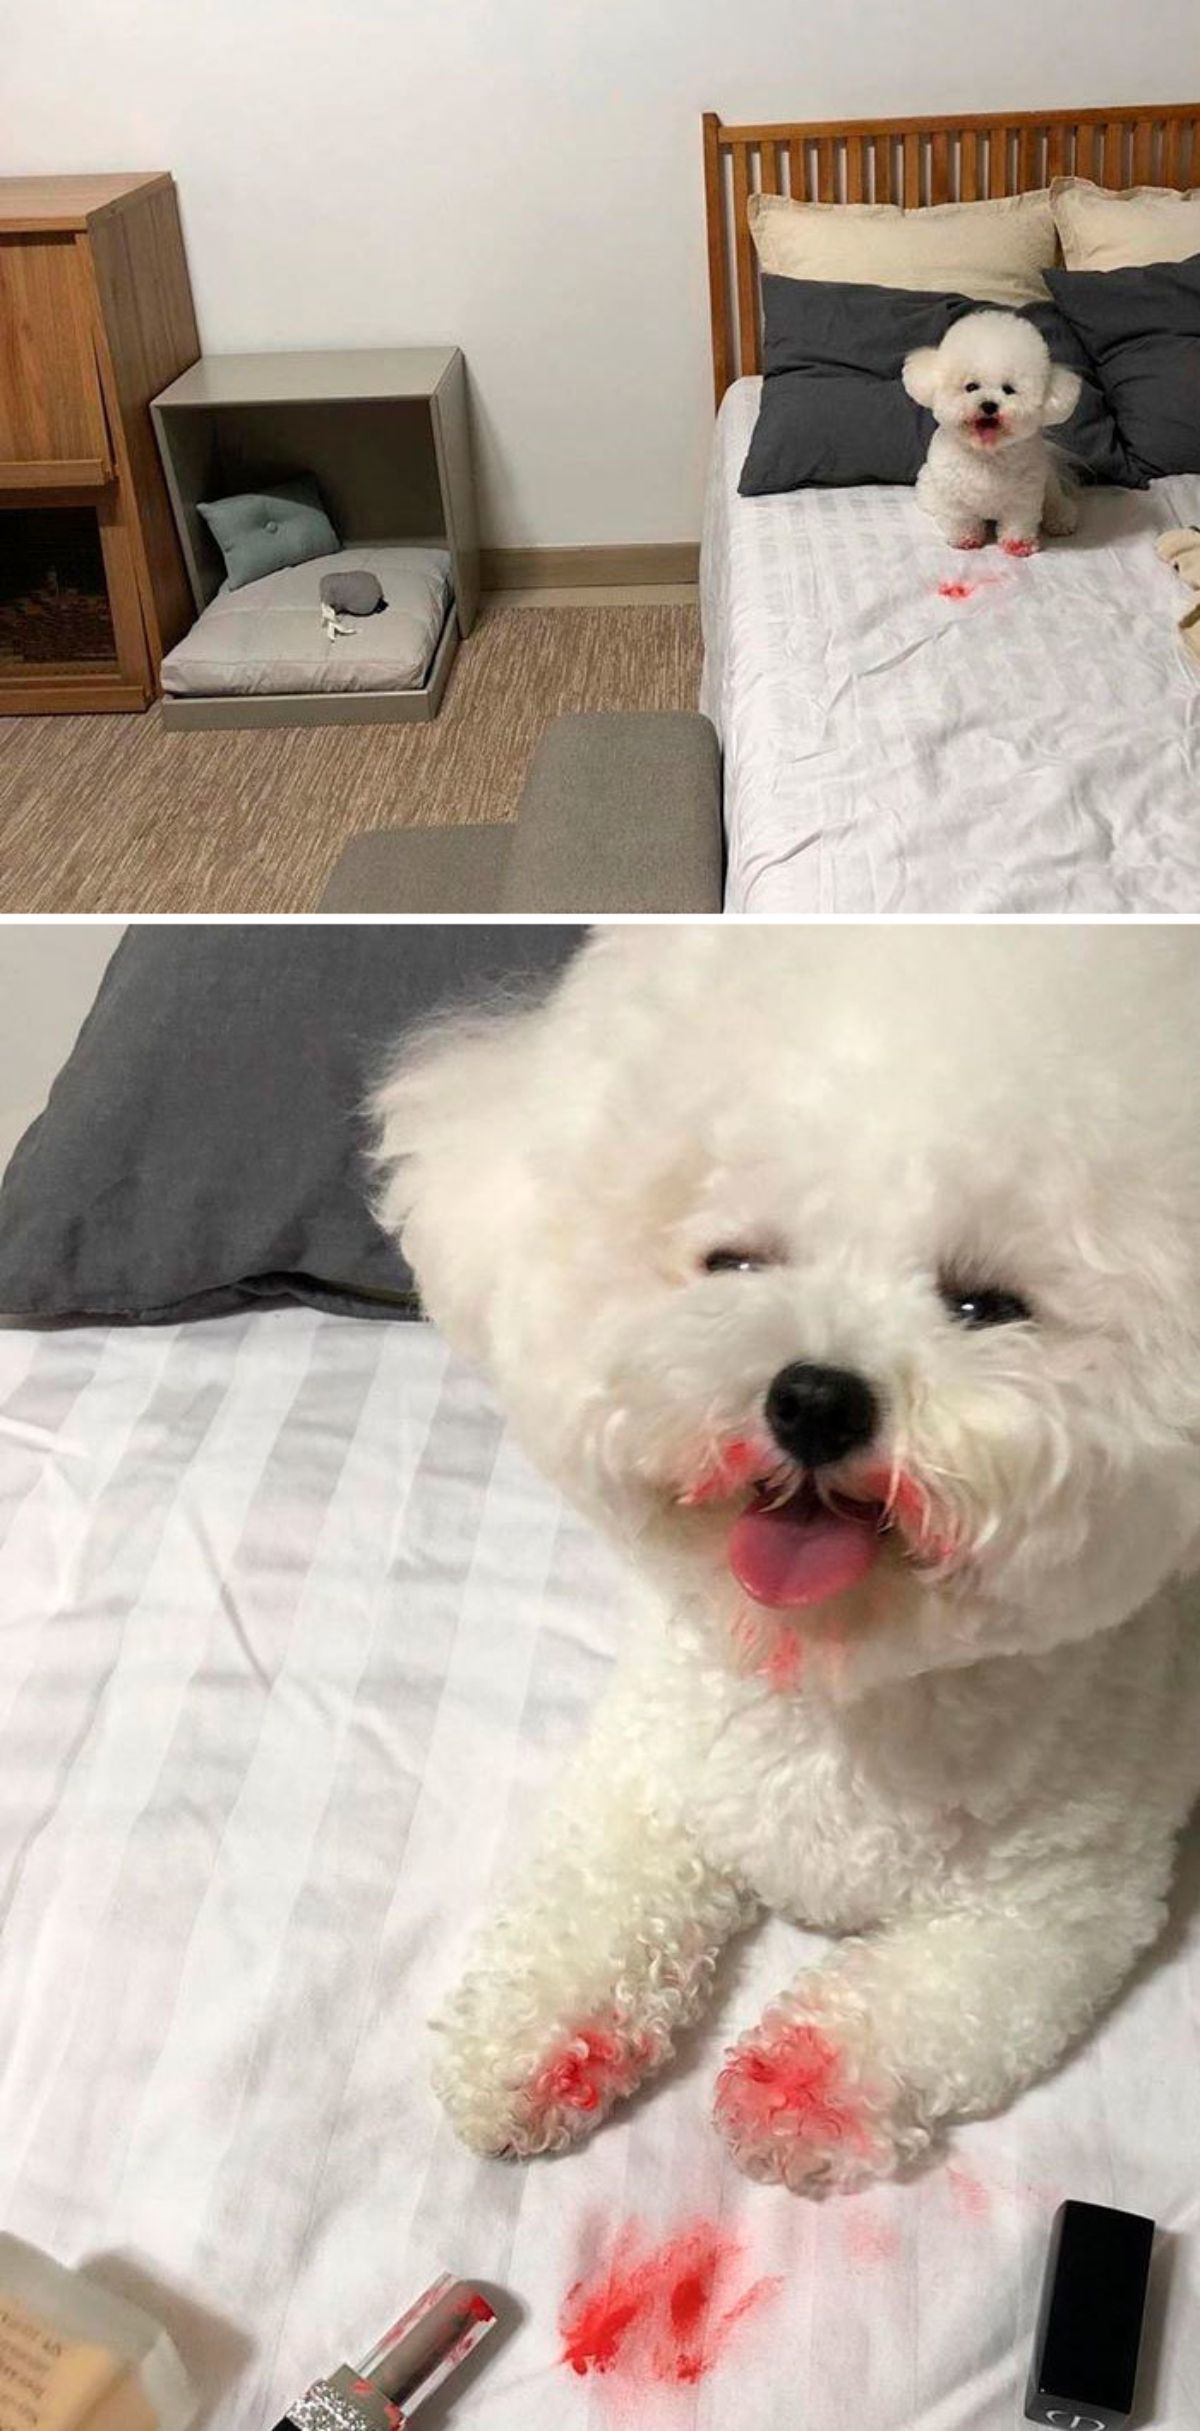 2 photos of a small white fluffy dog with red around its mouth and on its paws on a white bed